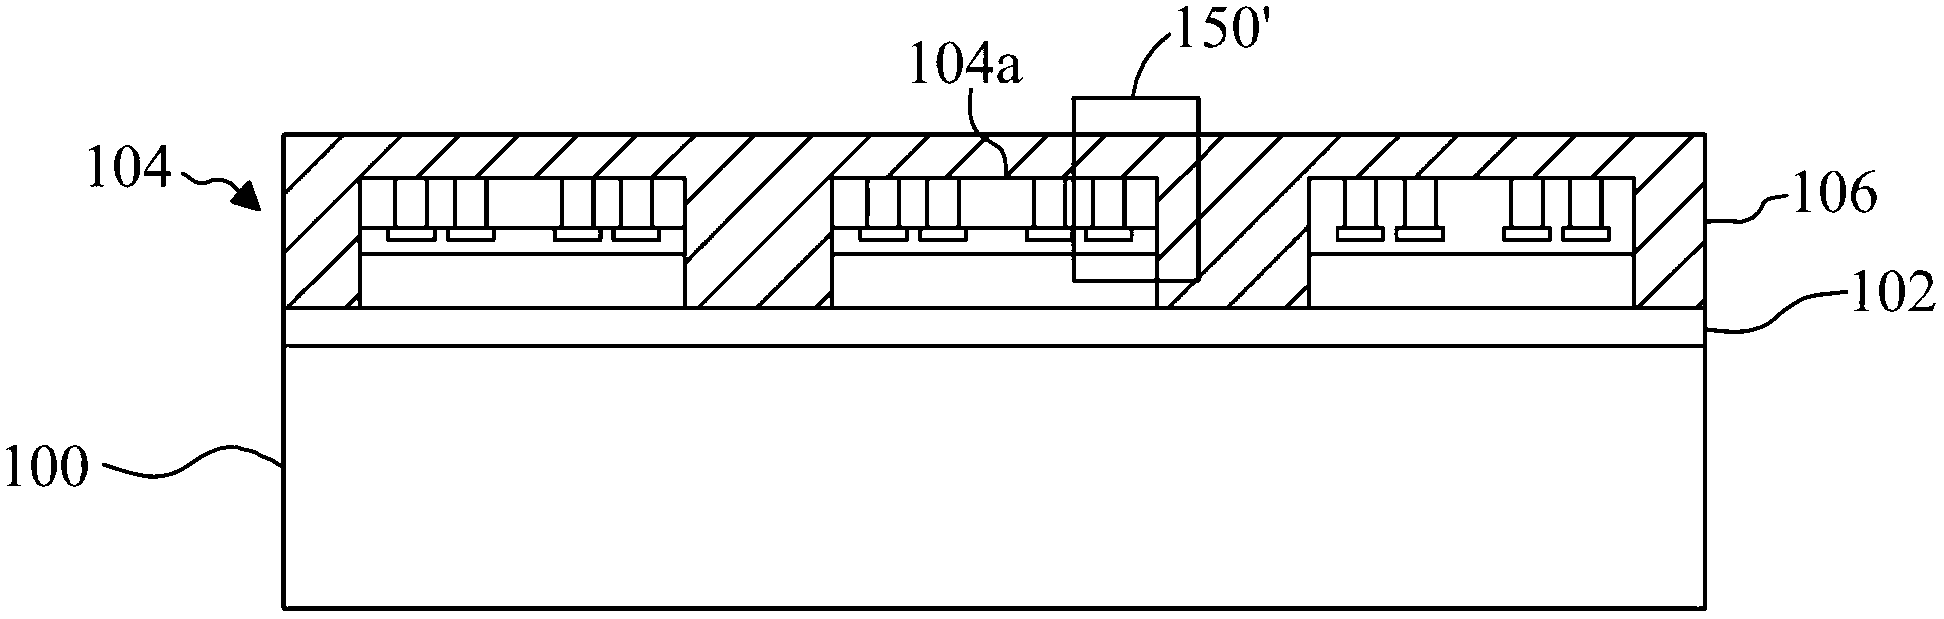 Packaged semiconductor device and method of packaging the semiconductor device